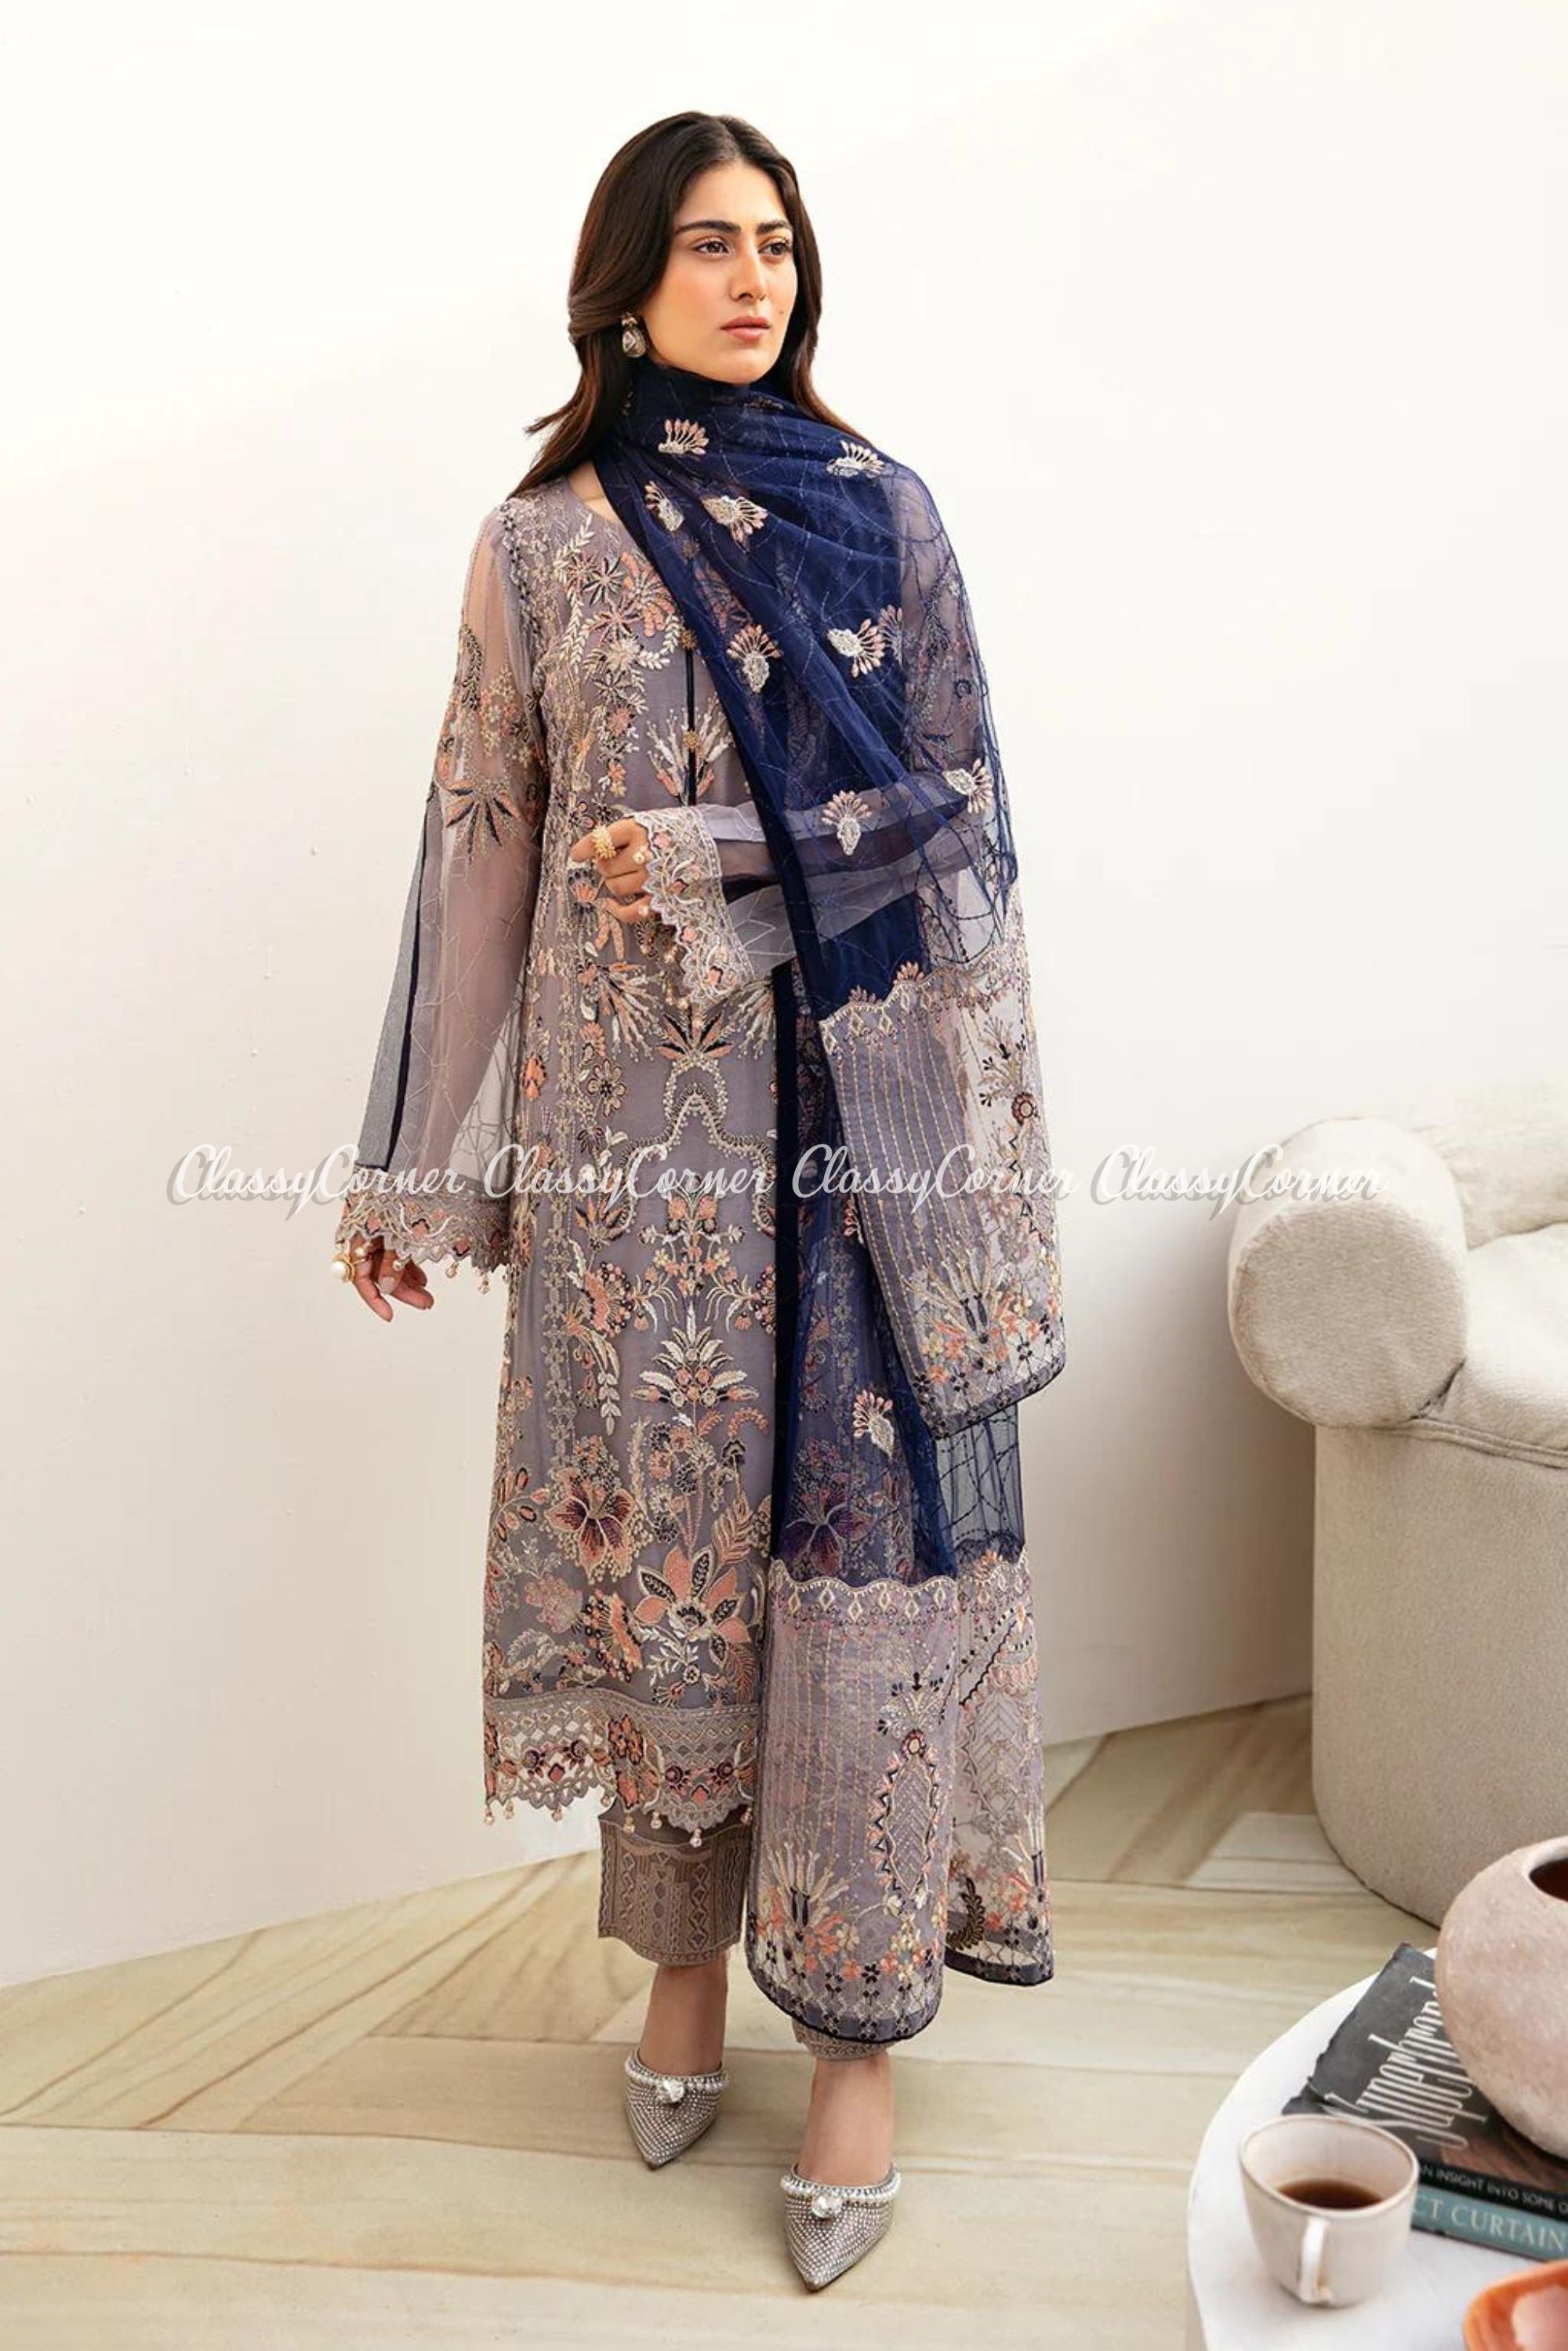 Pakistani Semi Formal Outfits For Women 